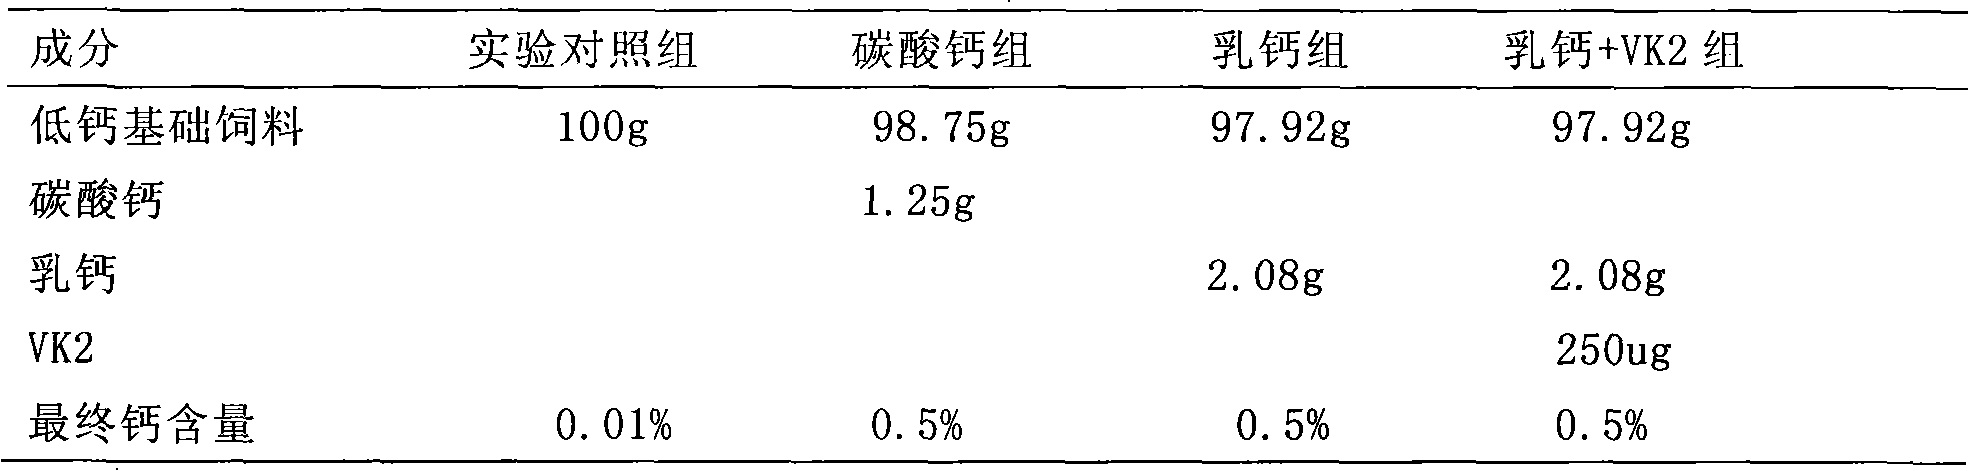 Nutrition composition and application thereof